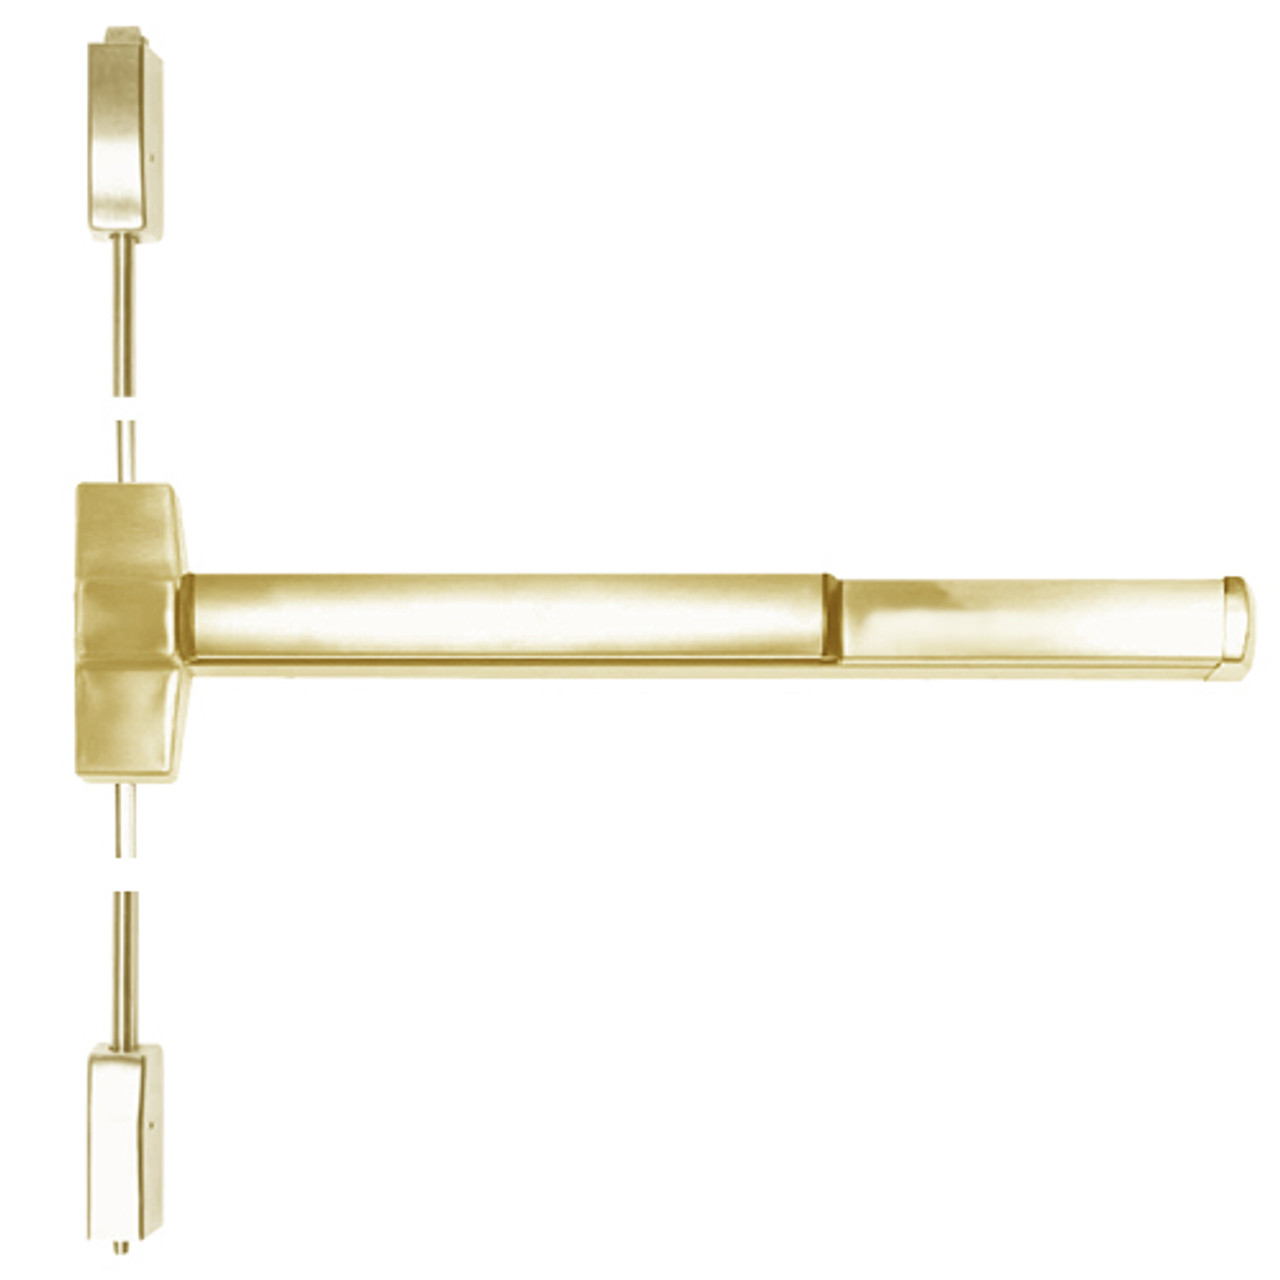 ED5400A-606-W048-MELR-M92 Corbin ED5400 Series Fire Rated Vertical Rod Exit Device with Motor Latch Retraction and Touchbar Monitoring in Satin Brass Finish